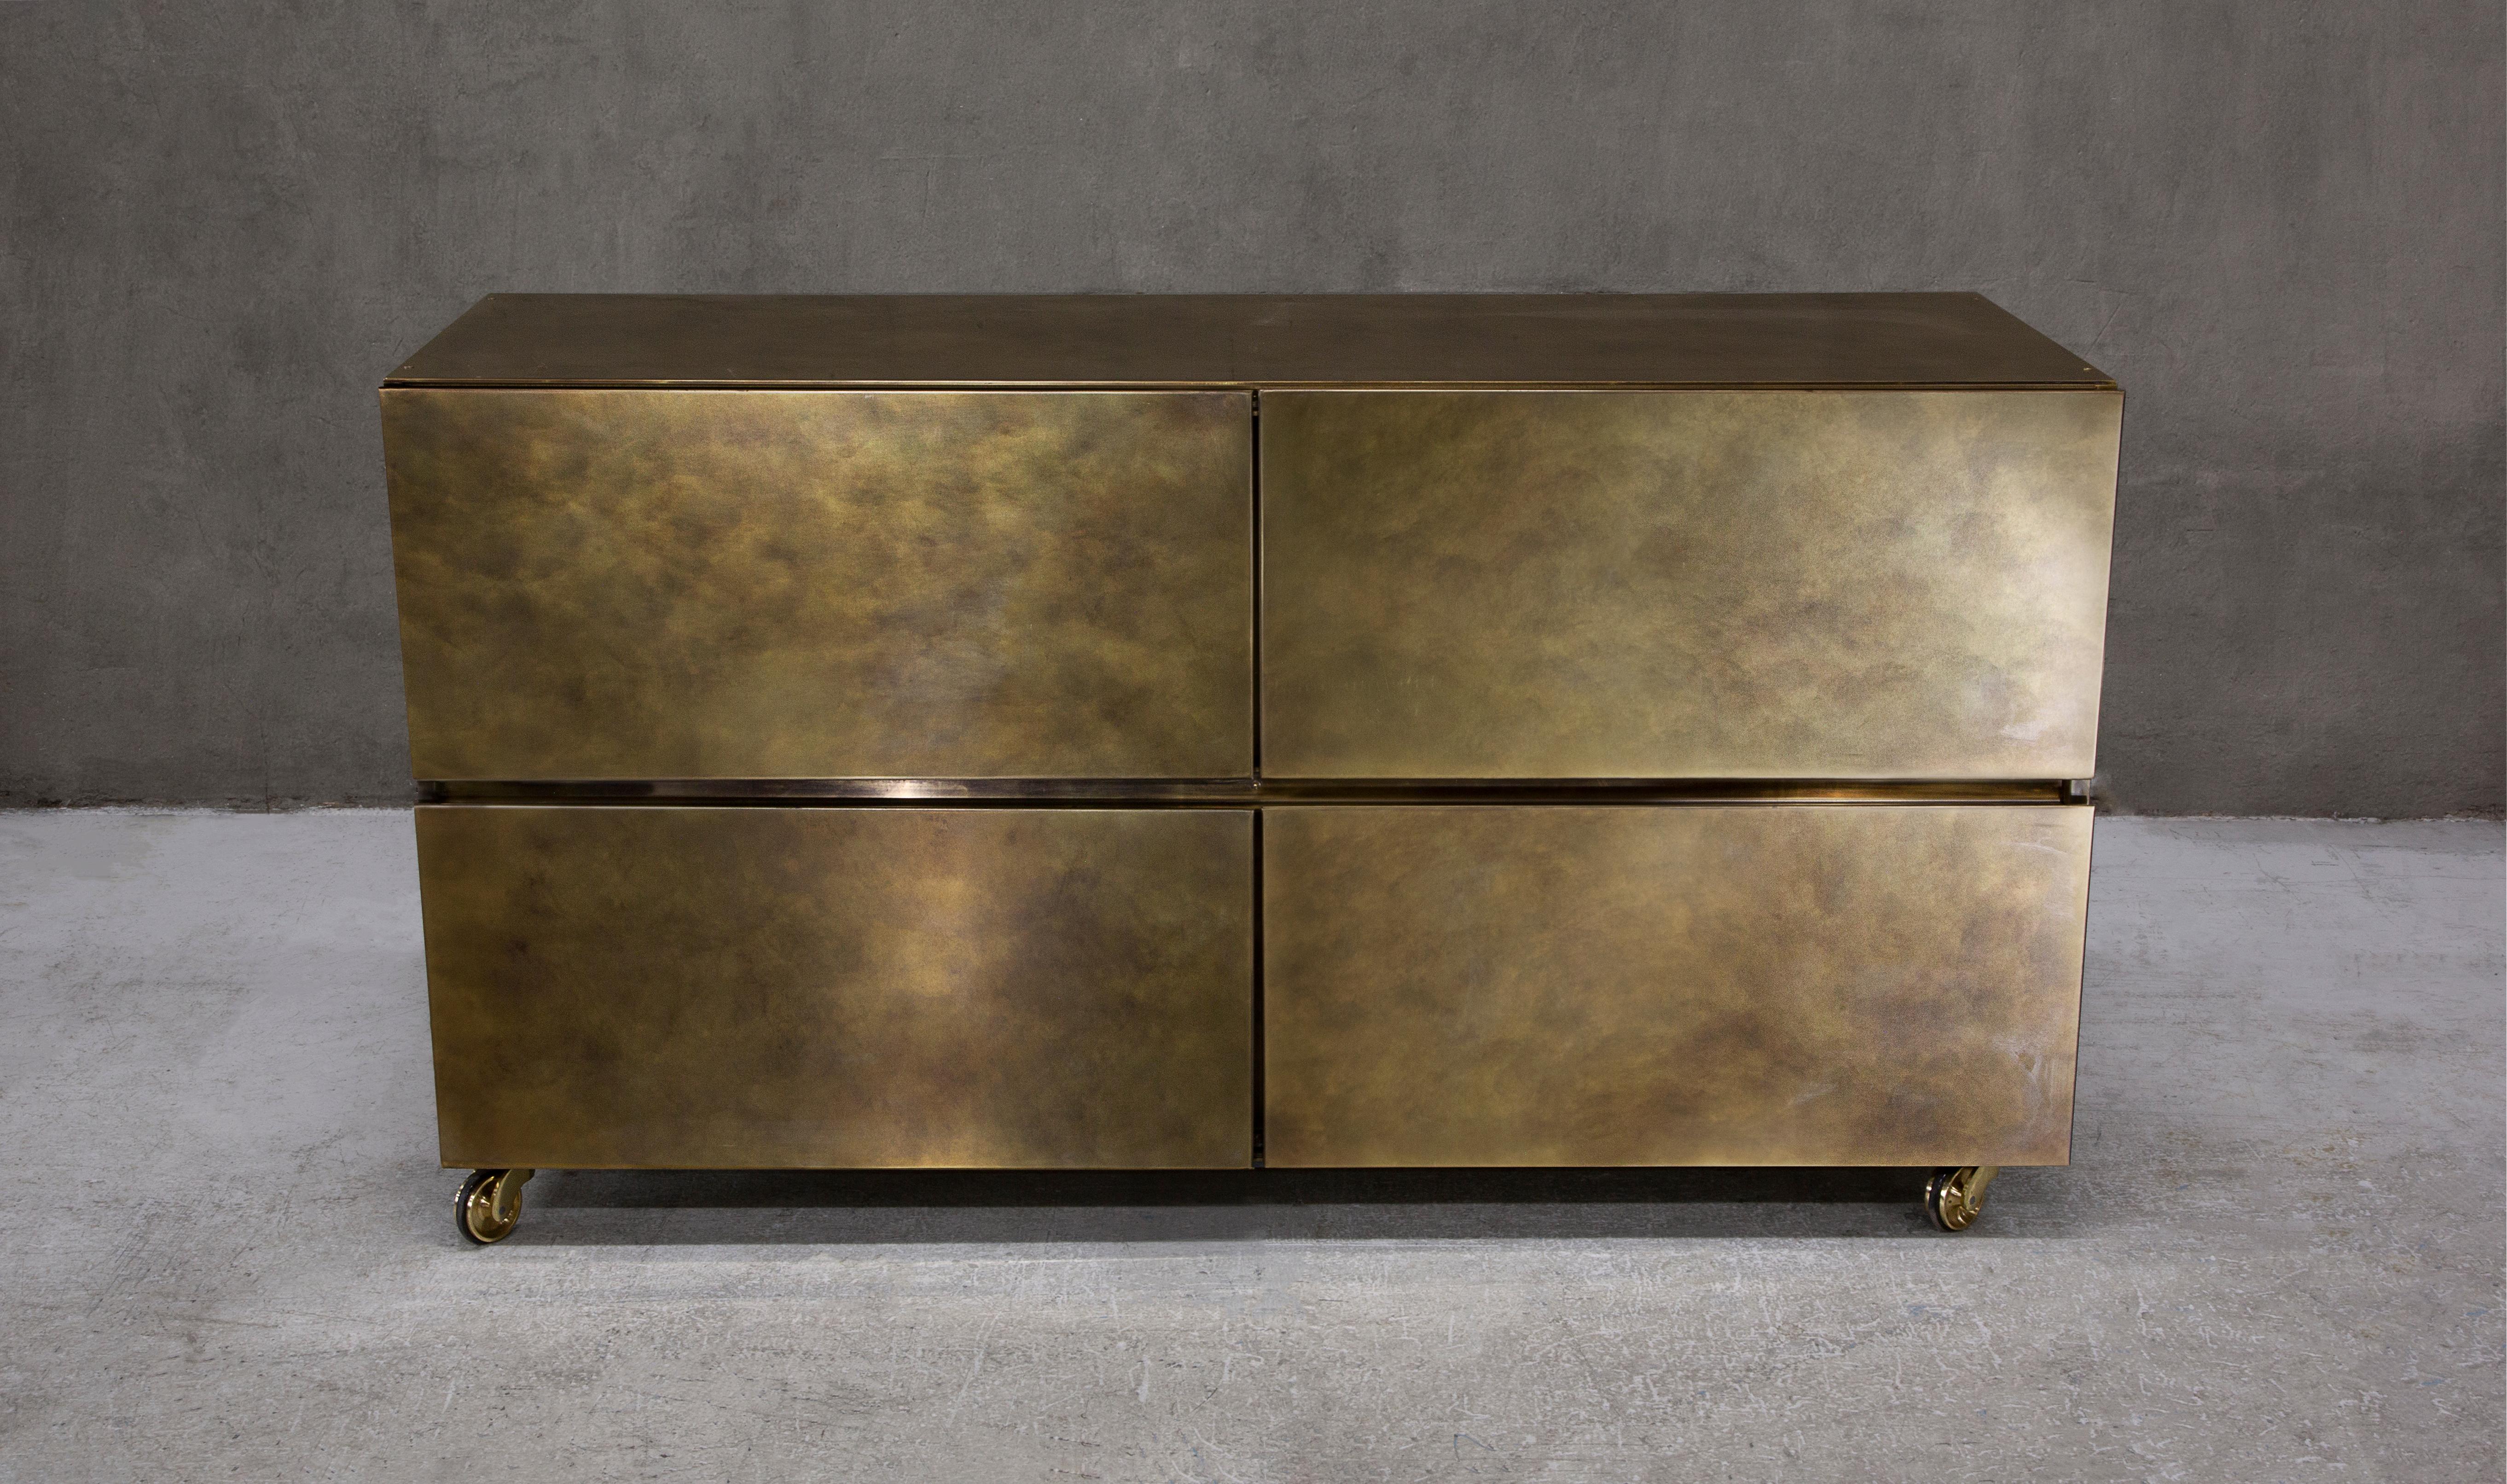 A four-drawered, wheeled storage cabinet in hand patinated brass, developed in collaboration with Pernille Lind Studio for their AM Office project in Copenhagen. 

Handcrafted in the North to order, Yohan can be commissioned in bespoke sizes,